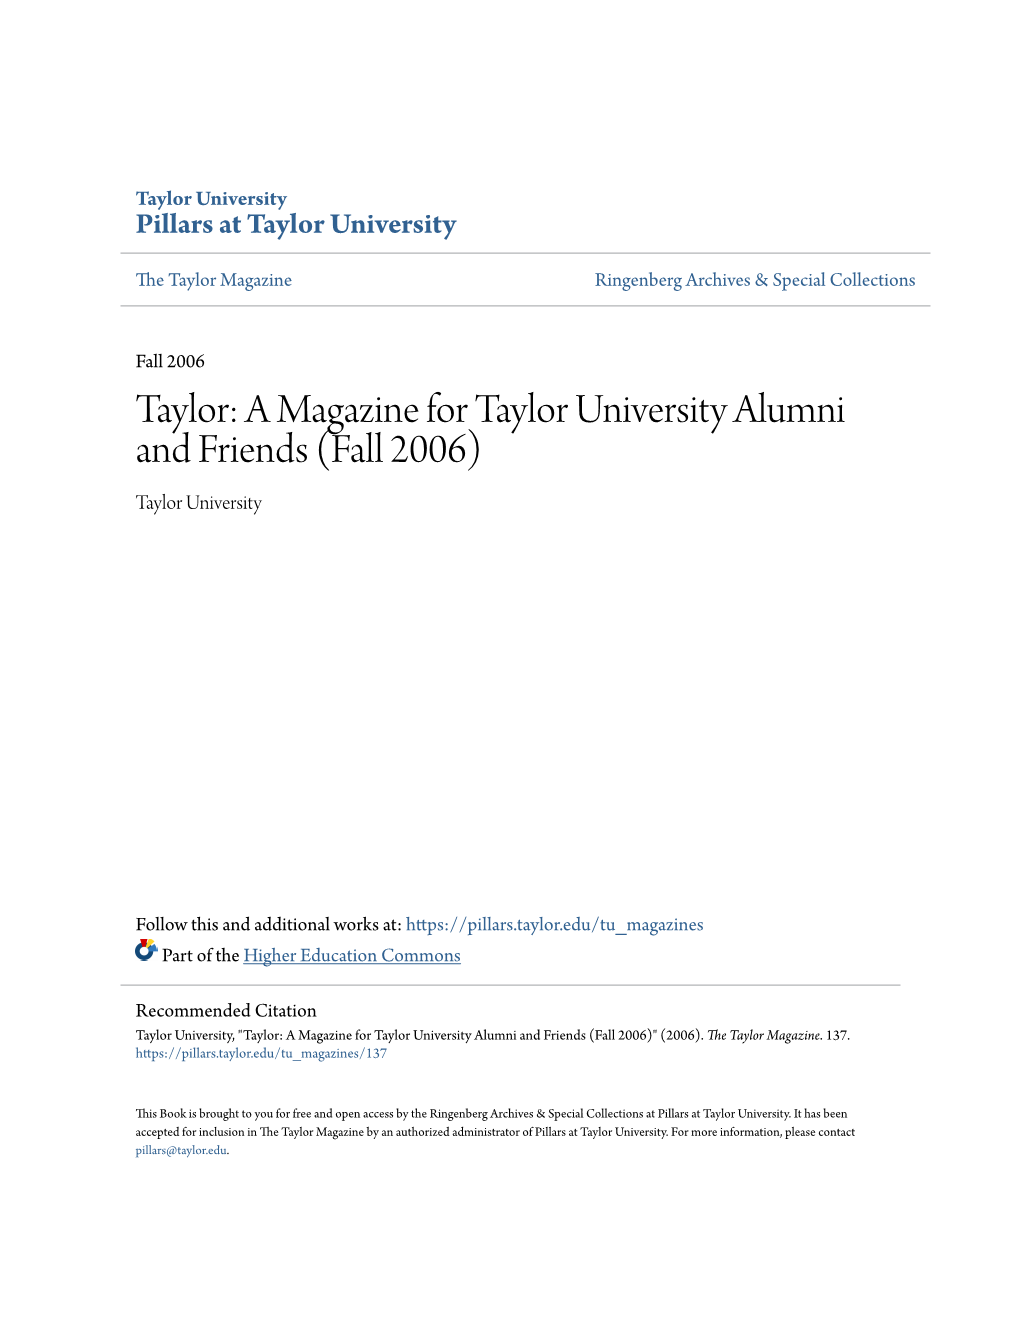 A Magazine for Taylor University Alumni and Friends (Fall 2006) Taylor University